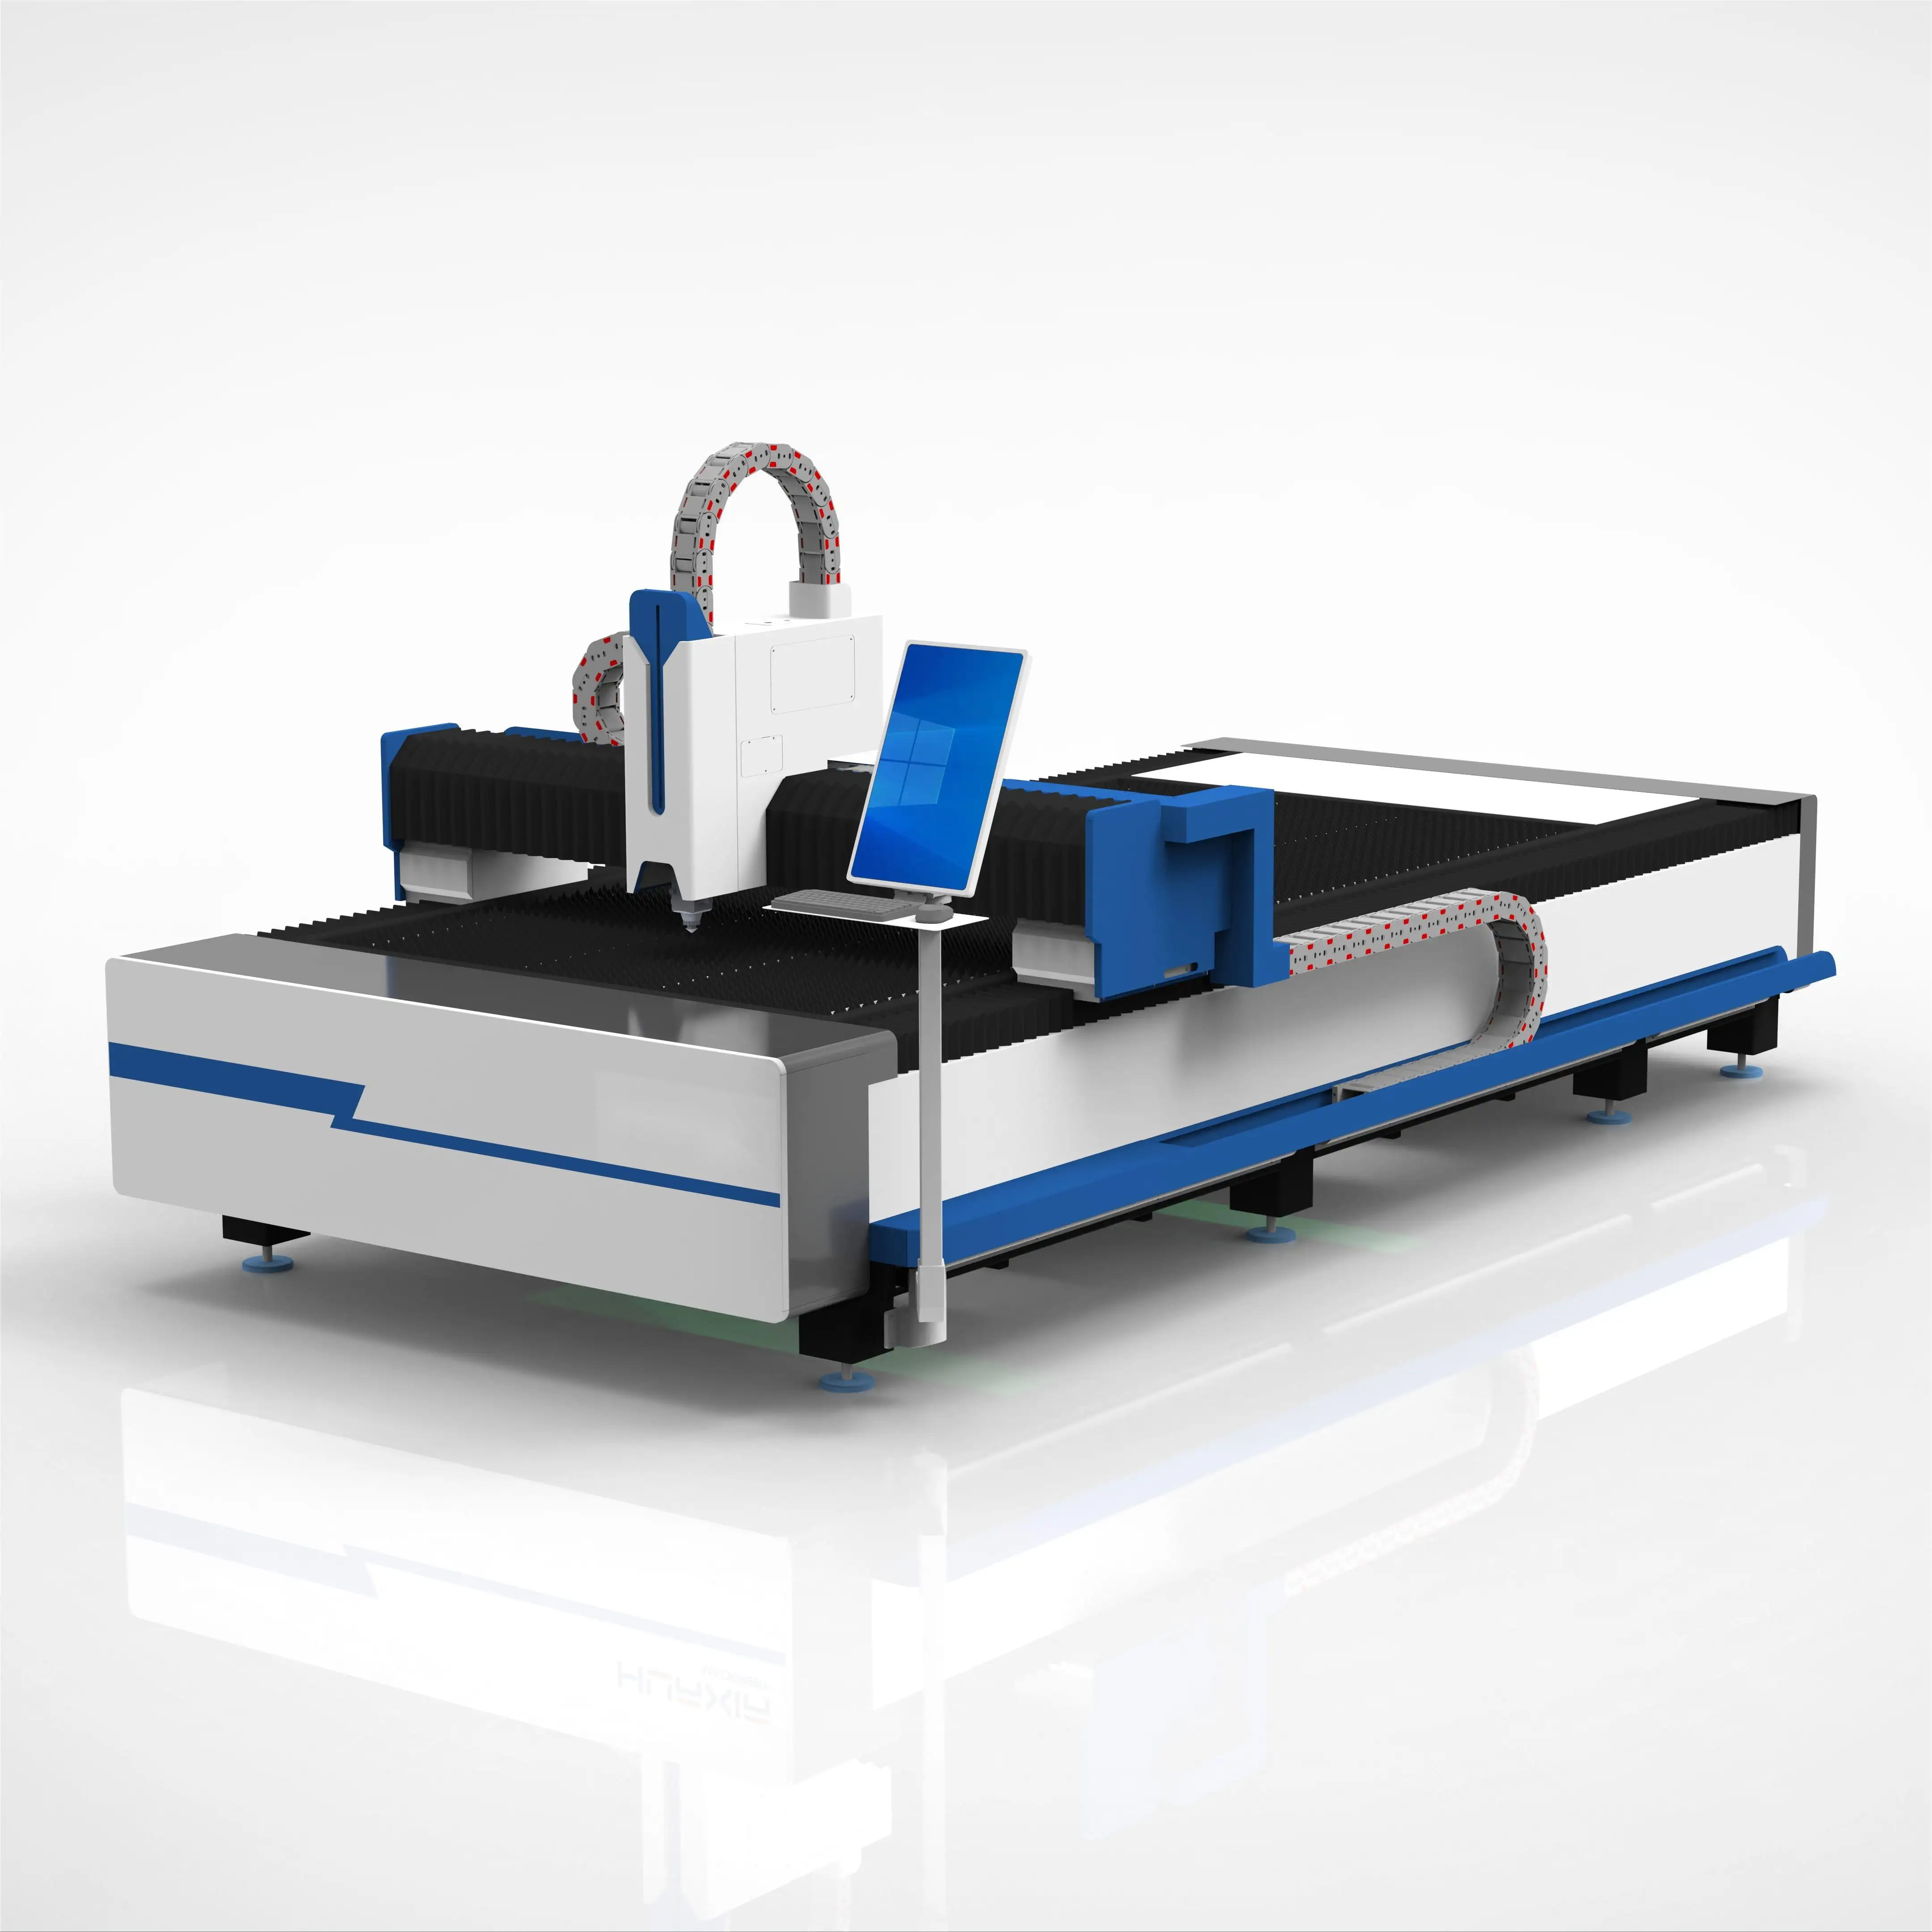 3015 Table Type Laser Cutting Machine for stainless steel galvanized sheet with Autofocus Laser Cutting Head